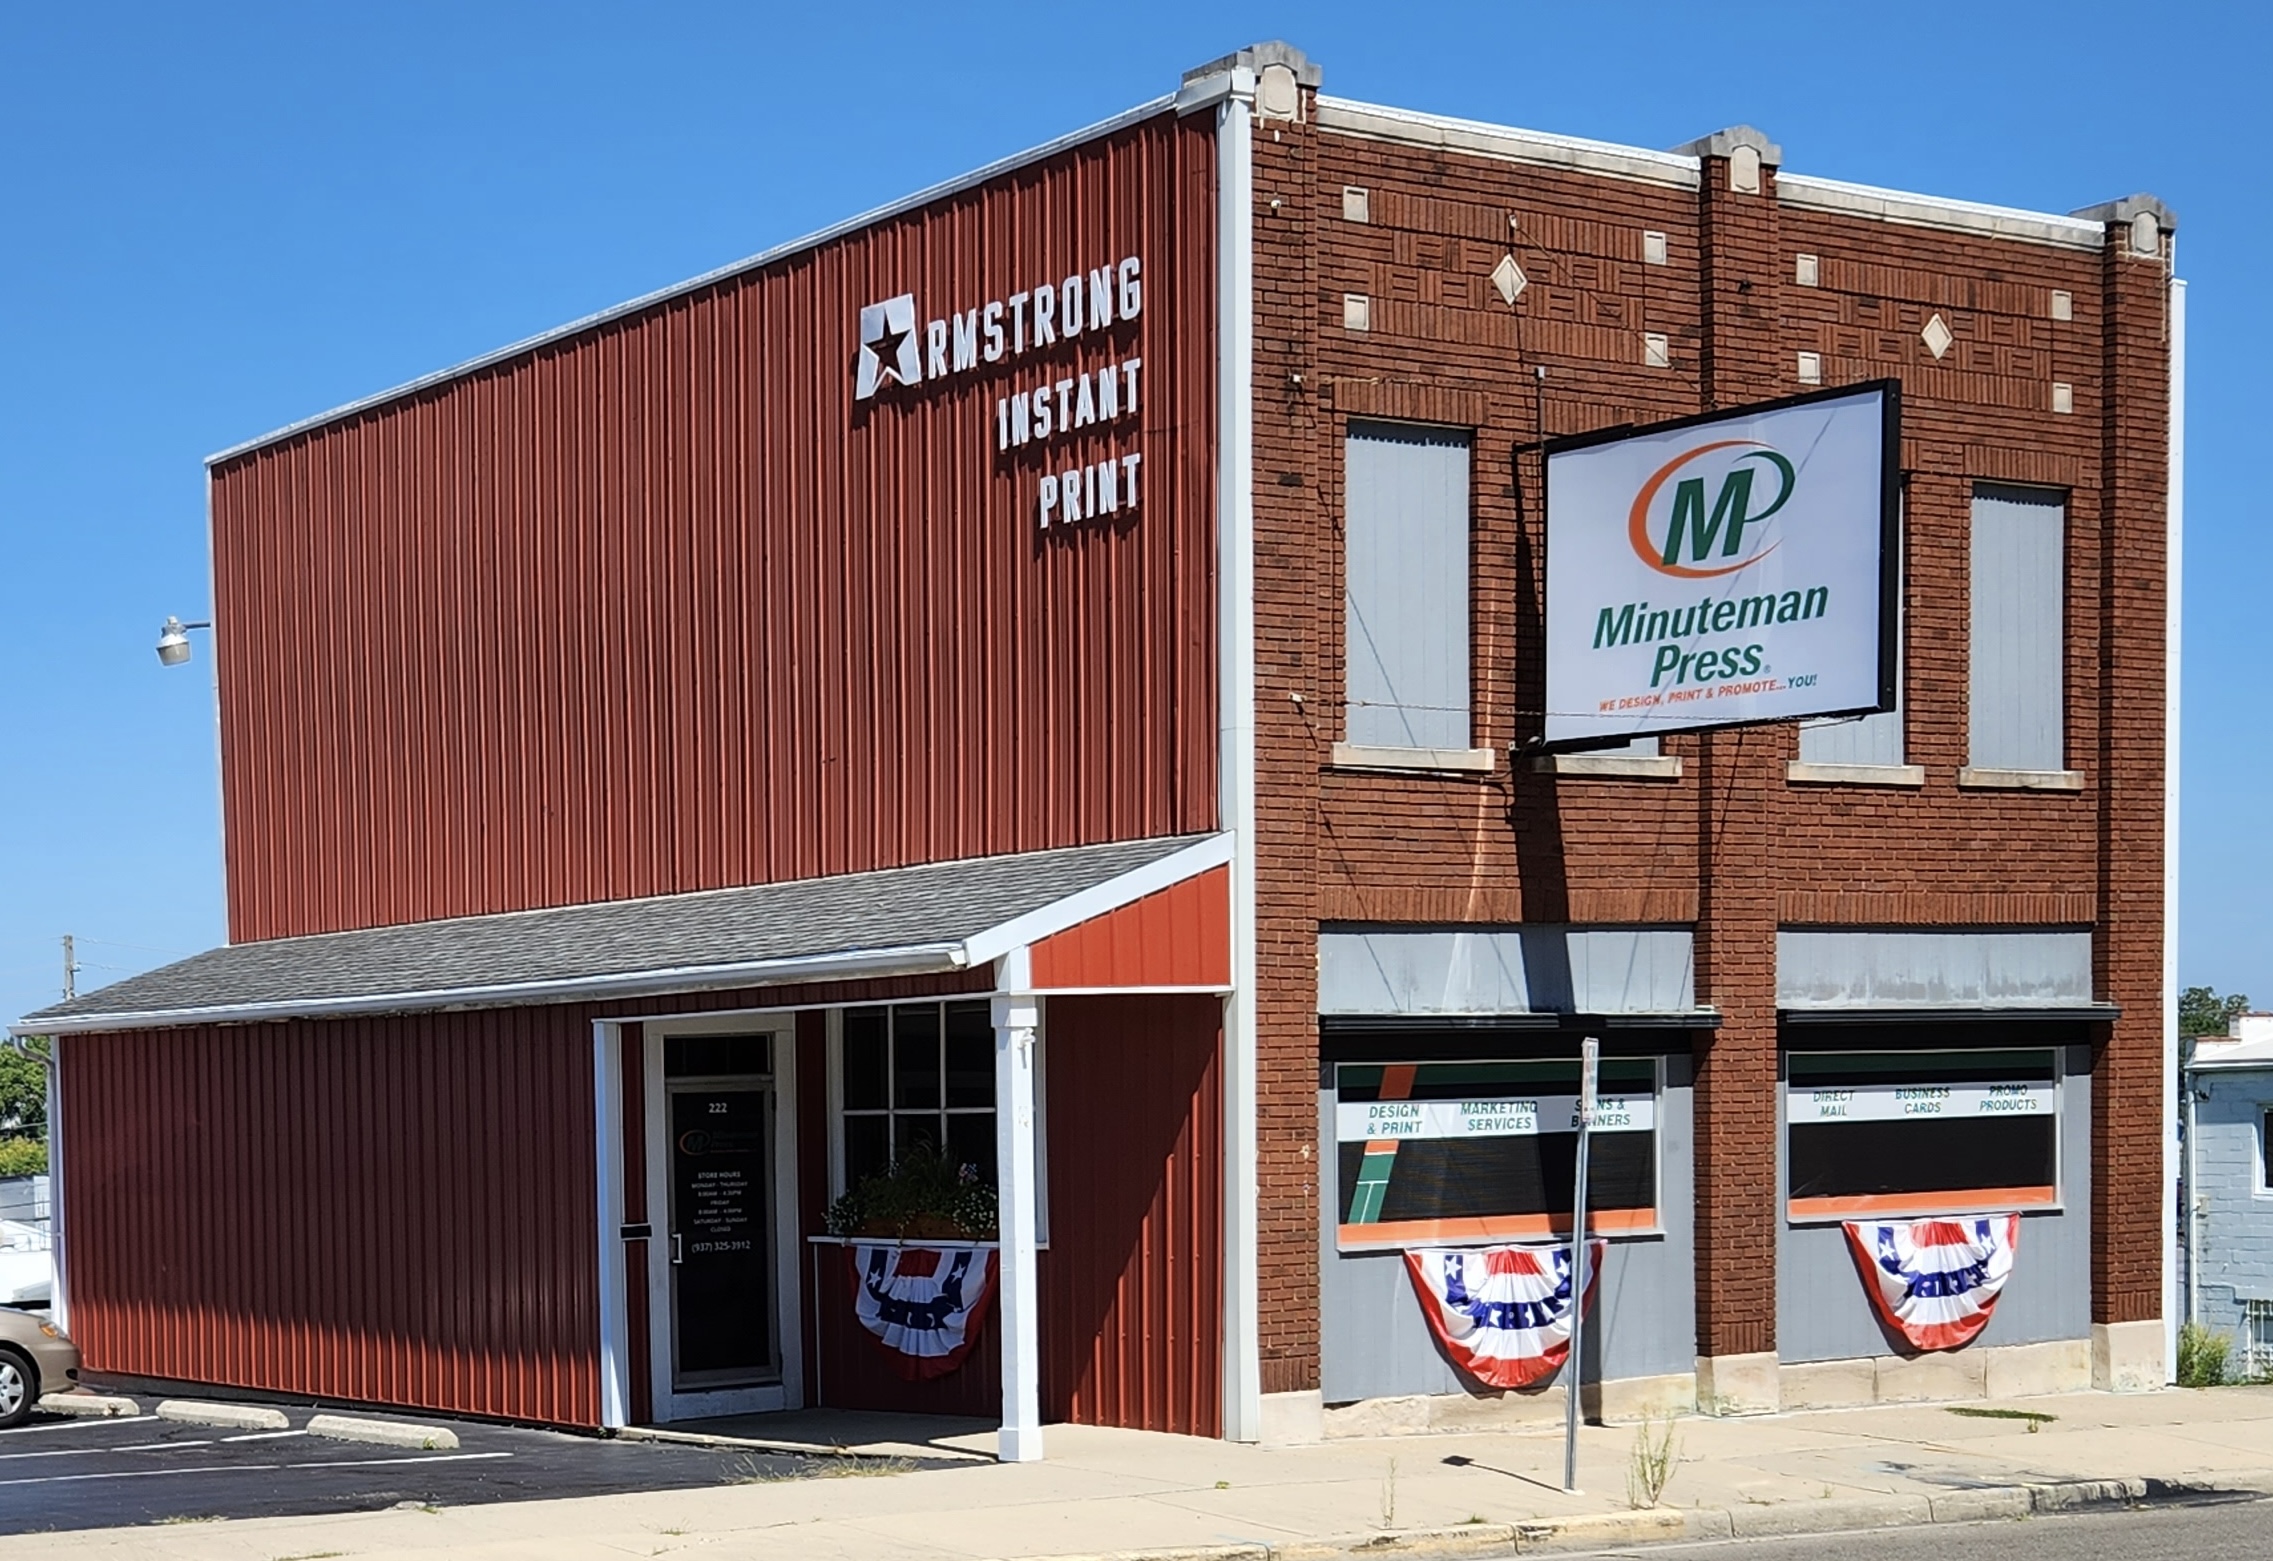 40-year business Armstrong Printing is now Minuteman Press, Springfield, Ohio. The business remains at 222 E. Main St. in Springfield. https://sellyourprintingbusiness.com